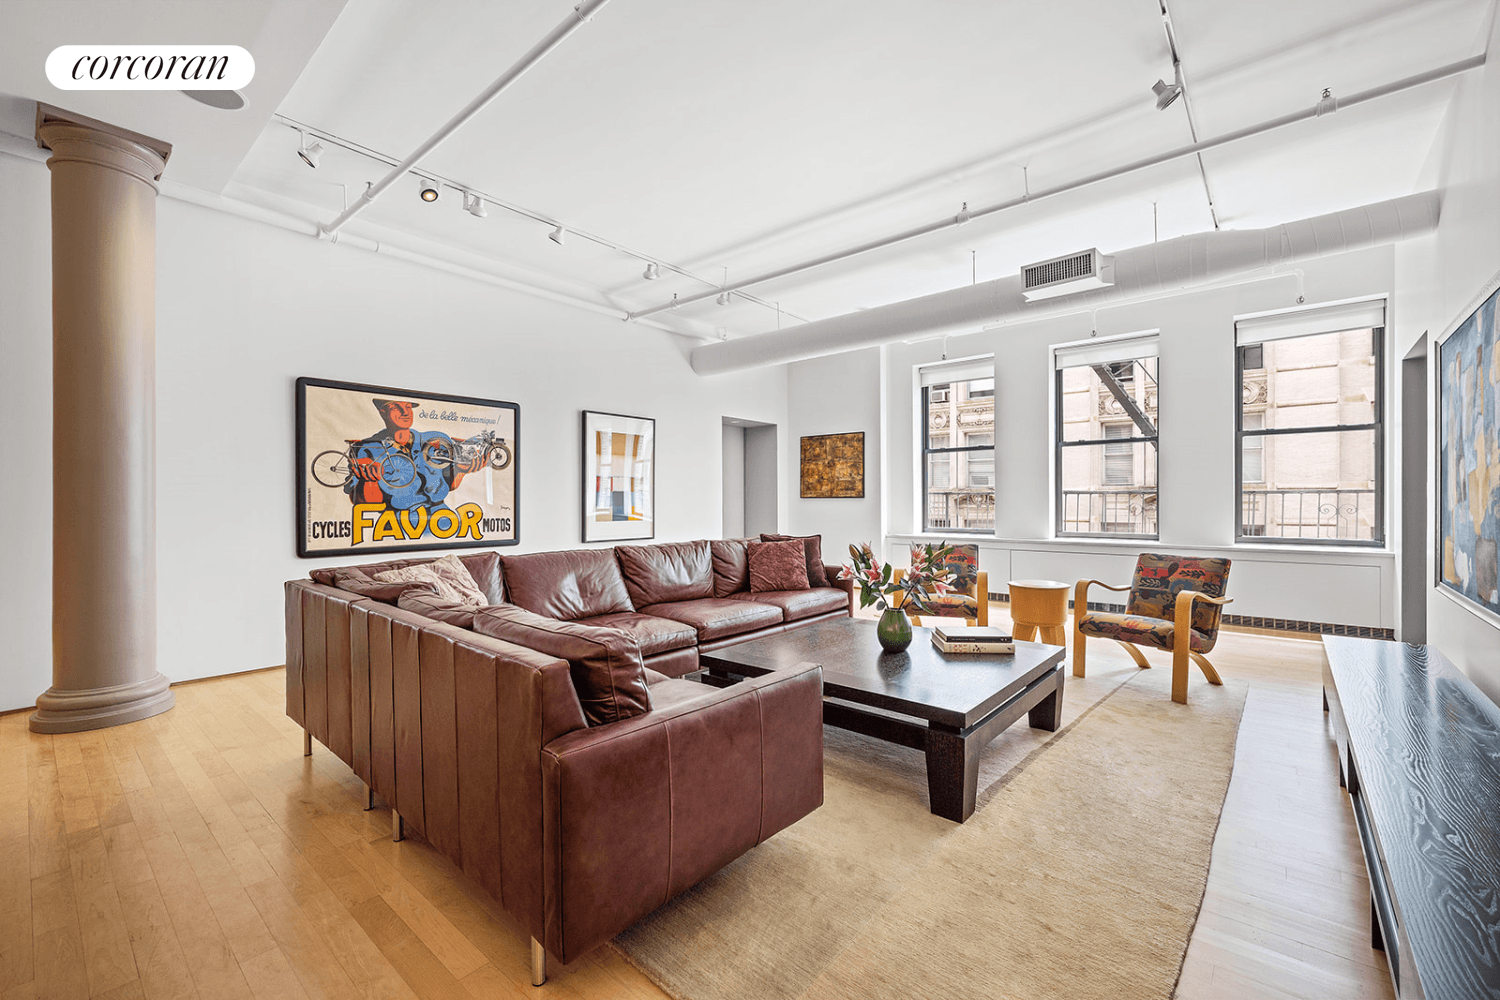 5 WEST 19TH STREET APARTMENT 8S PRIME FLATIRONThis is a tremendous opportunity to own an architecturally designed, fully renovated, live work, luxury LOFT in prime Flatiron.